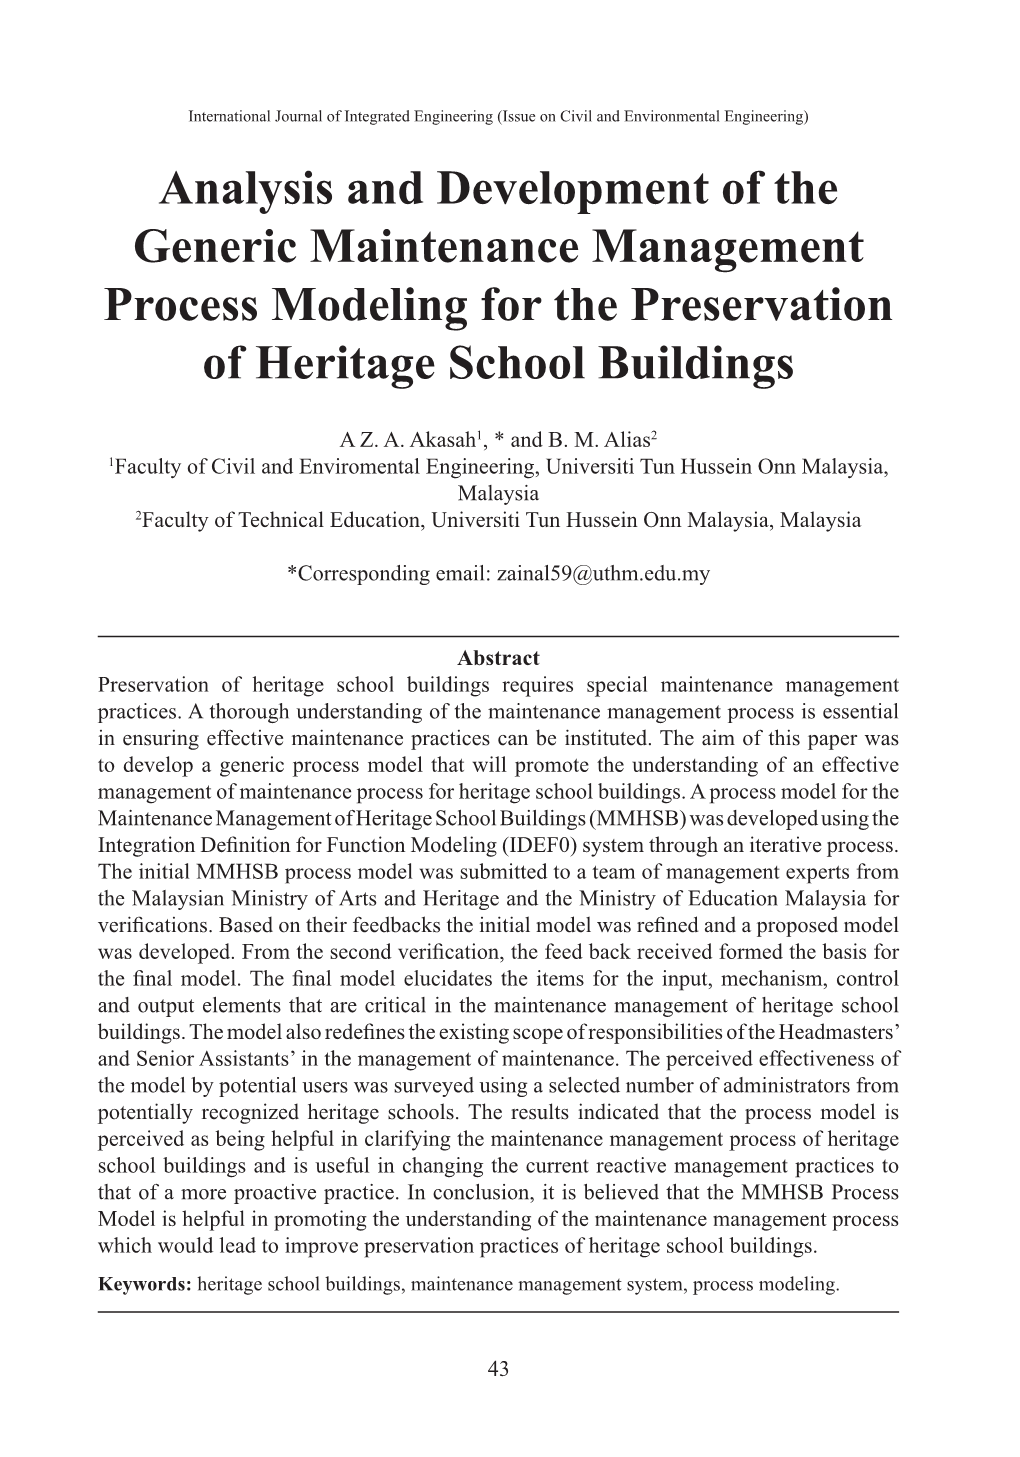 Analysis and Development of the Generic Maintenance Management Process Modeling for the Preservation of Heritage School Buildings